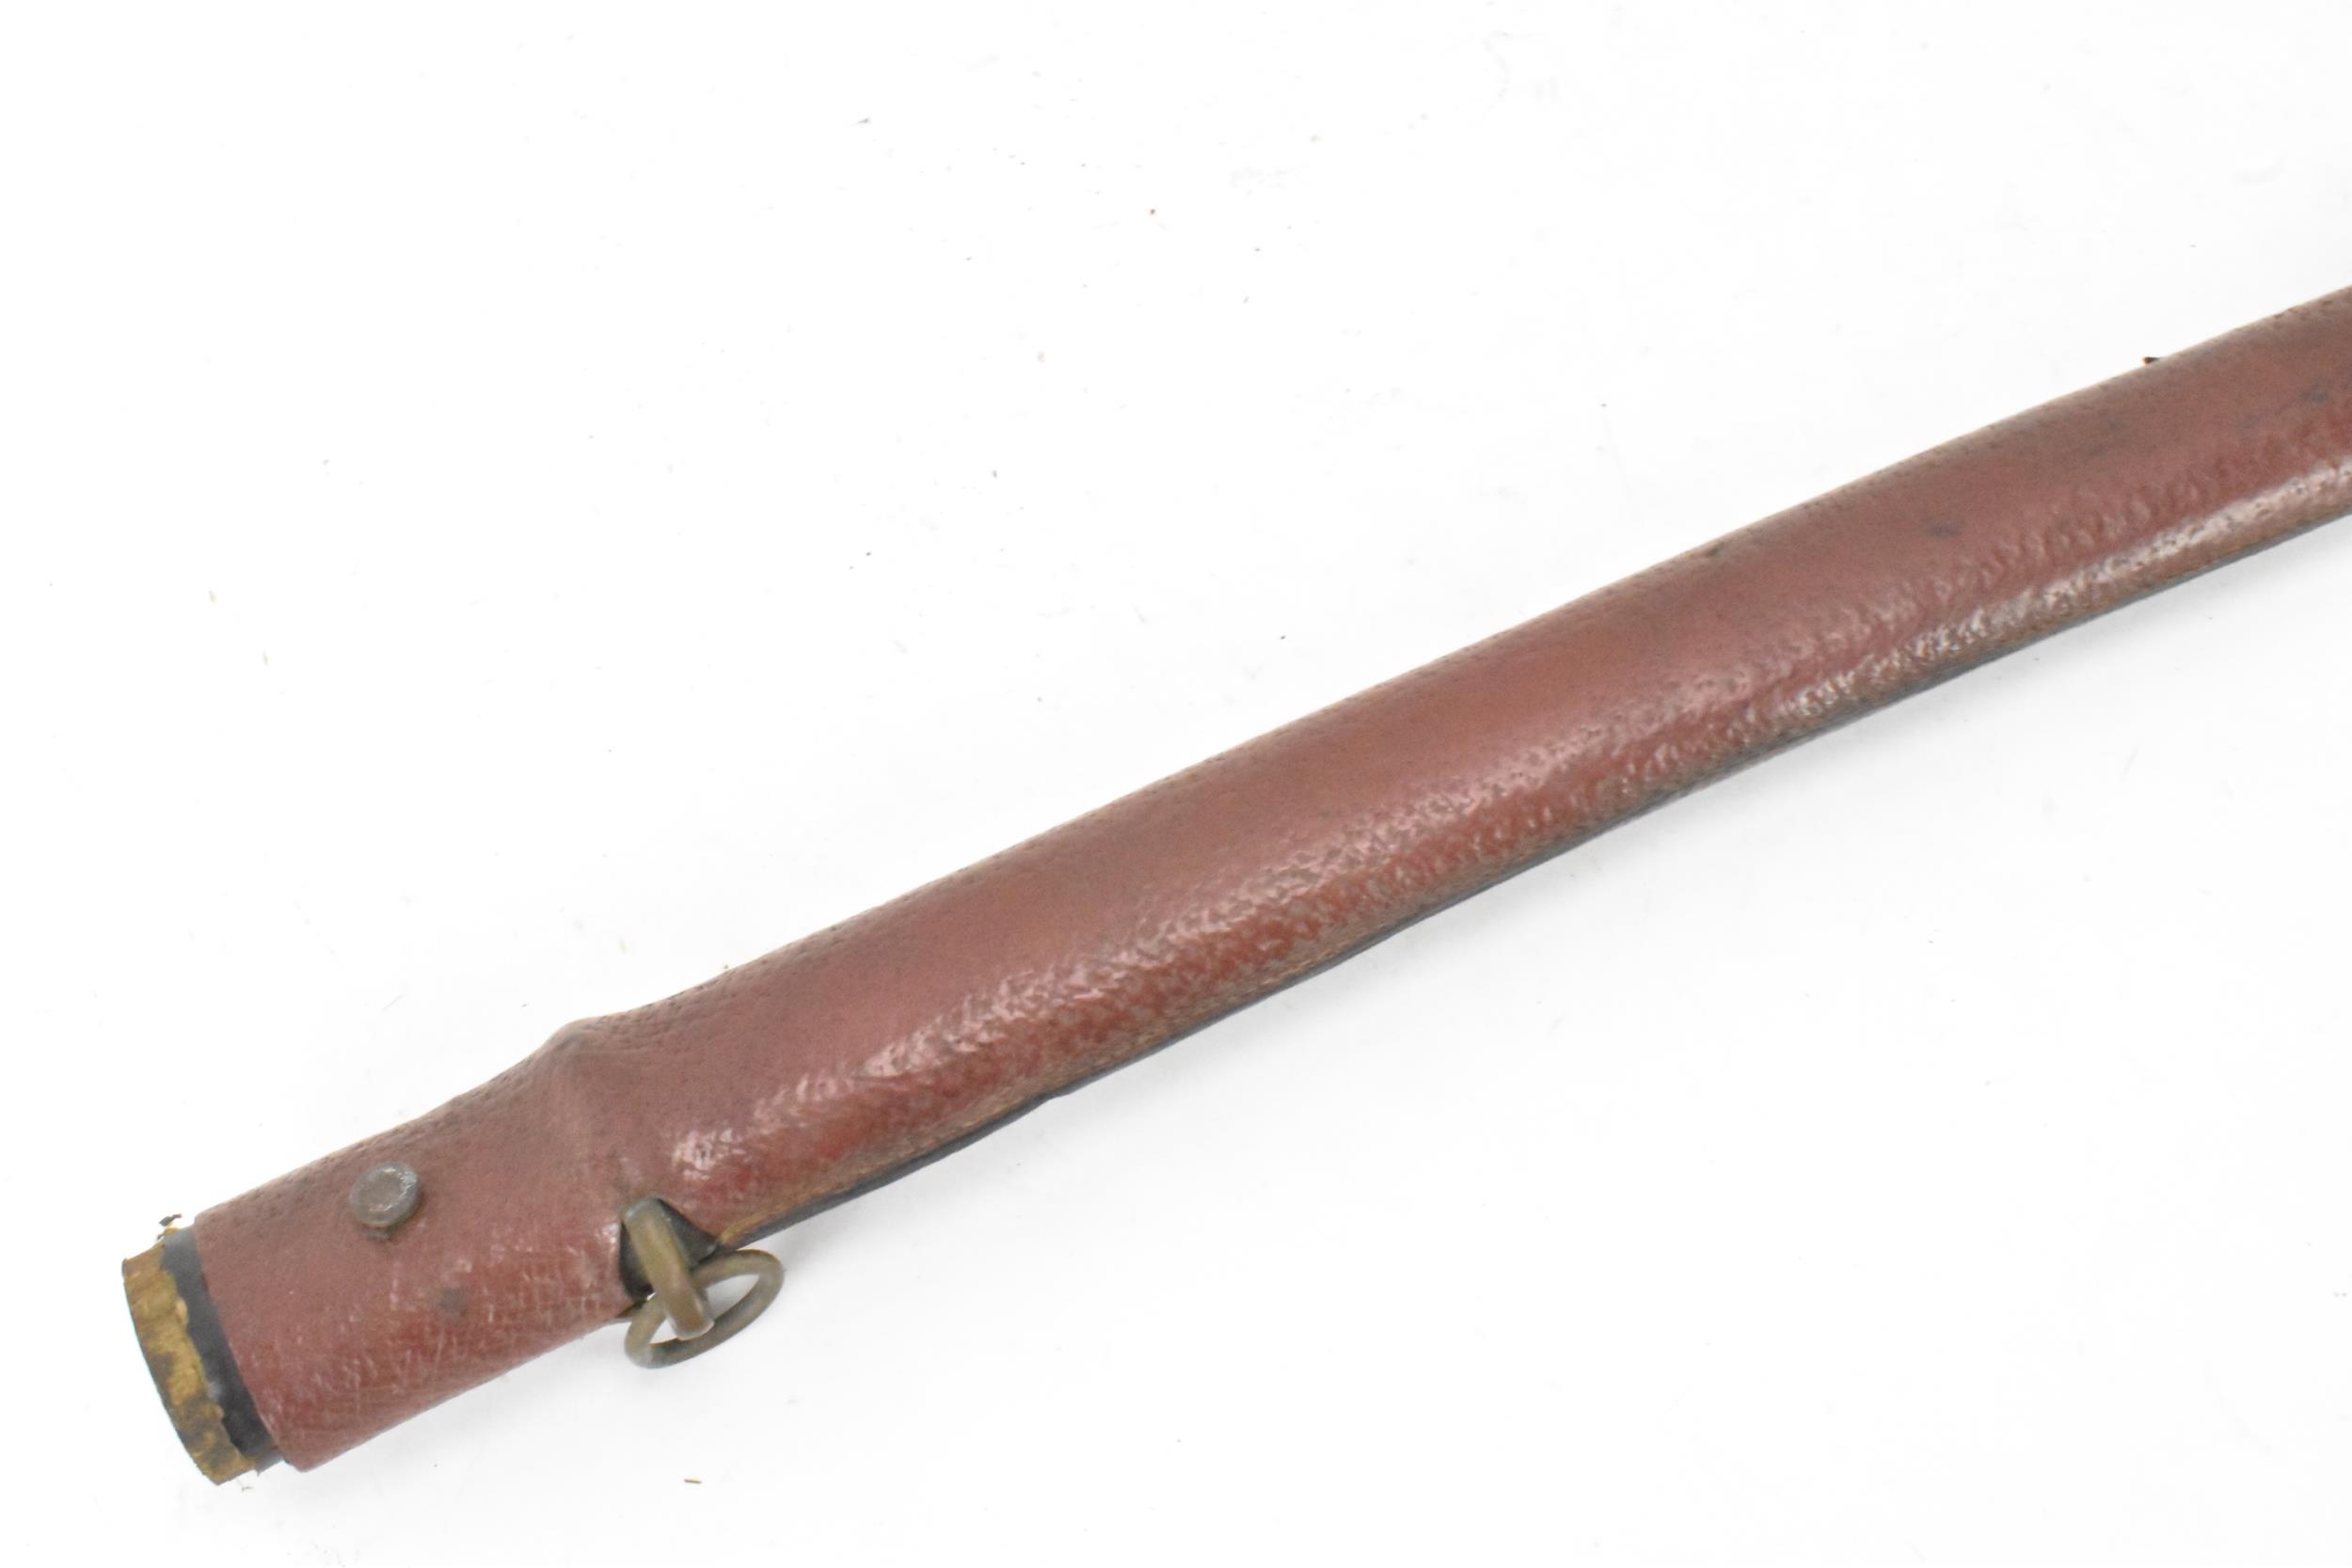 A WWII Japanese officers Katana sword and scabbard, both bound in red leather, steel blade, - Image 13 of 14